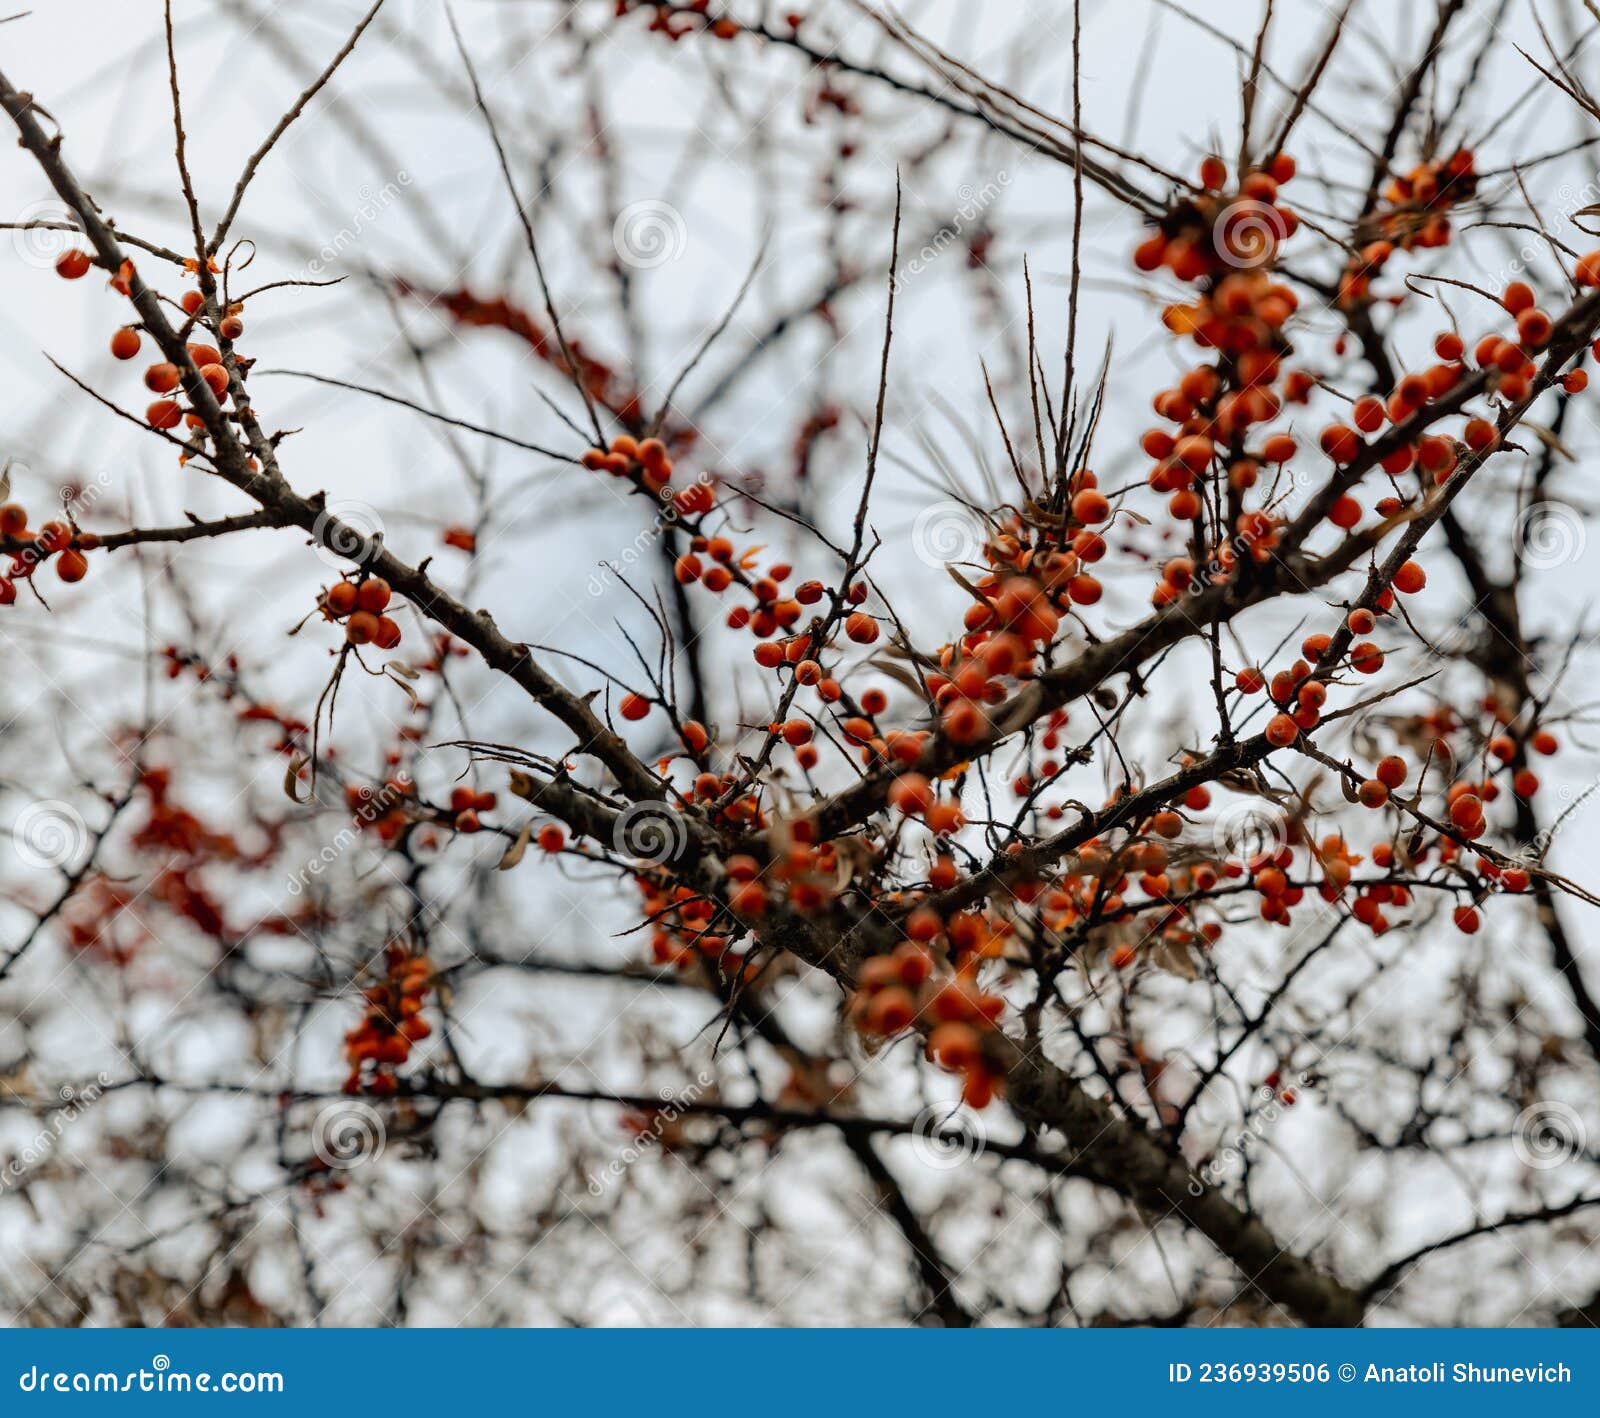 Sea Buckthorn Berries are Hanging on Bare Branches Against Water and ...